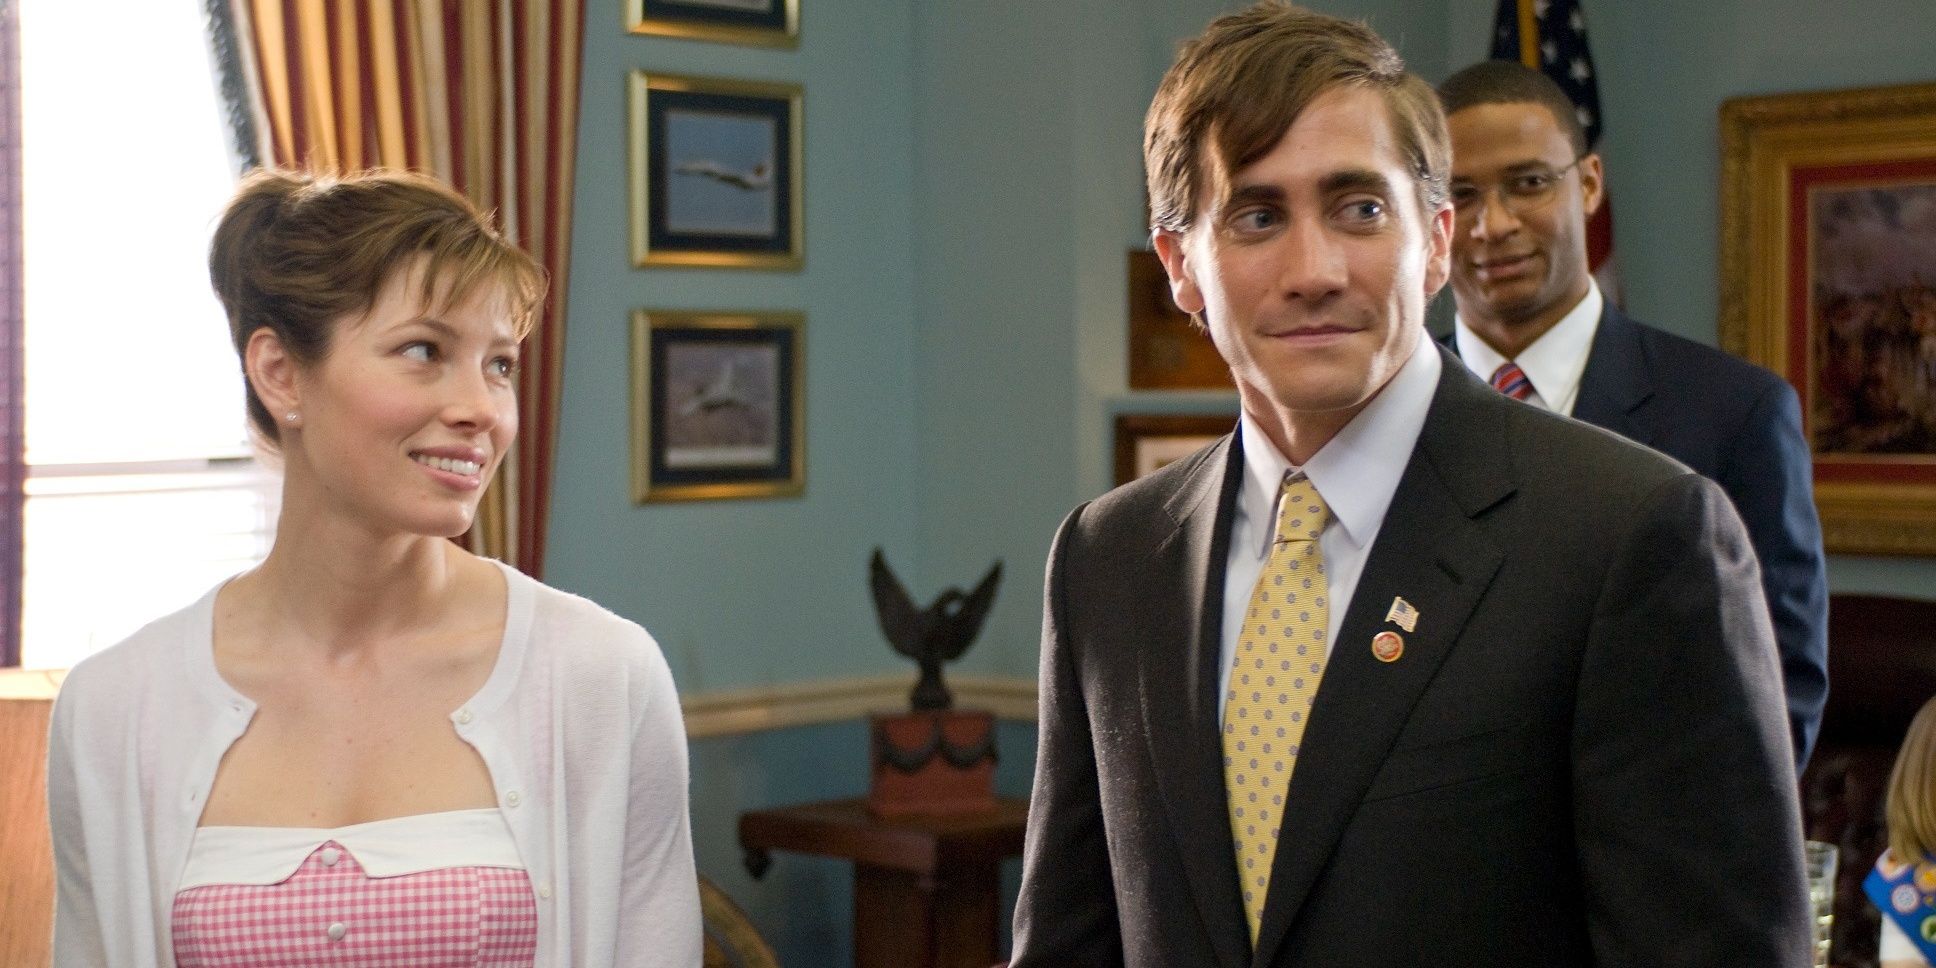 Jessica Beil and Jake Gyllenhaal in a government in Accidental Love